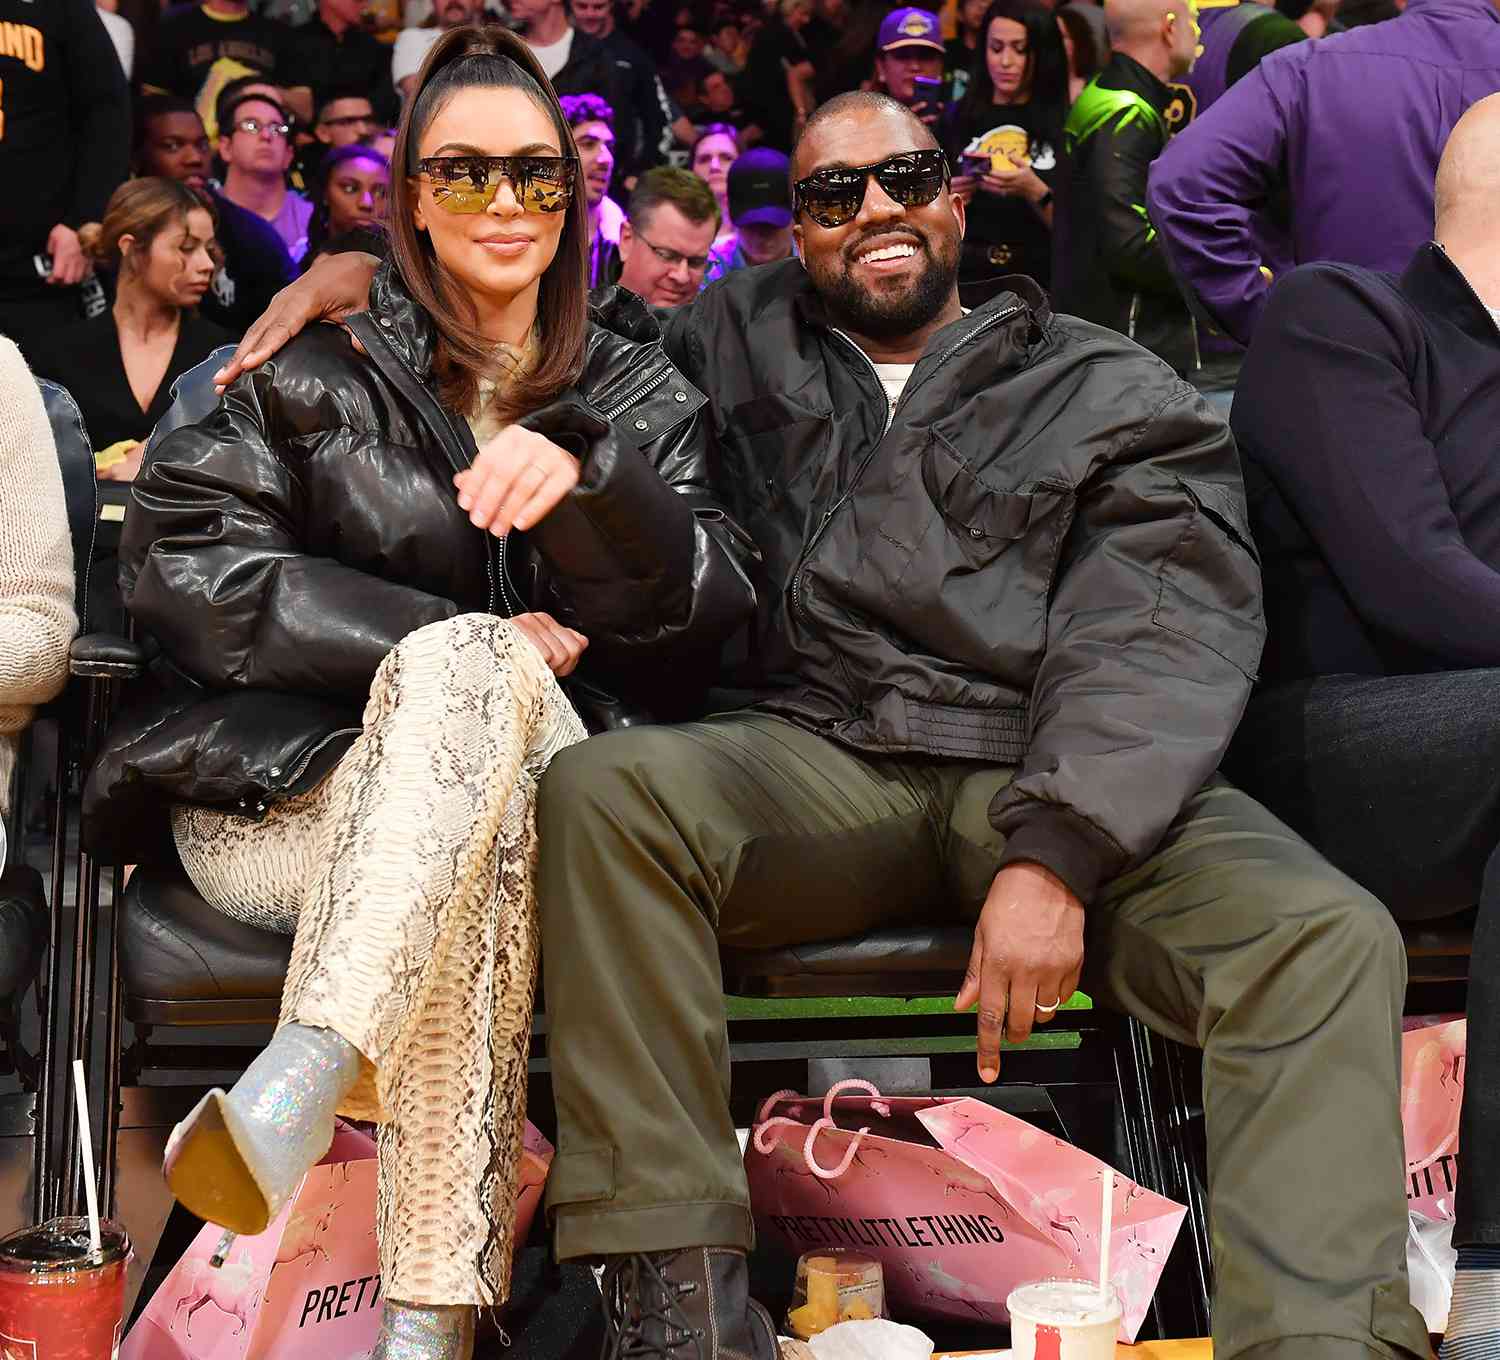 Kim Kardashian and Kanye West attend a basketball game between the Los Angeles Lakers and the Cleveland Cavaliers at Staples Center on January 13, 2020 in Los Angeles, California